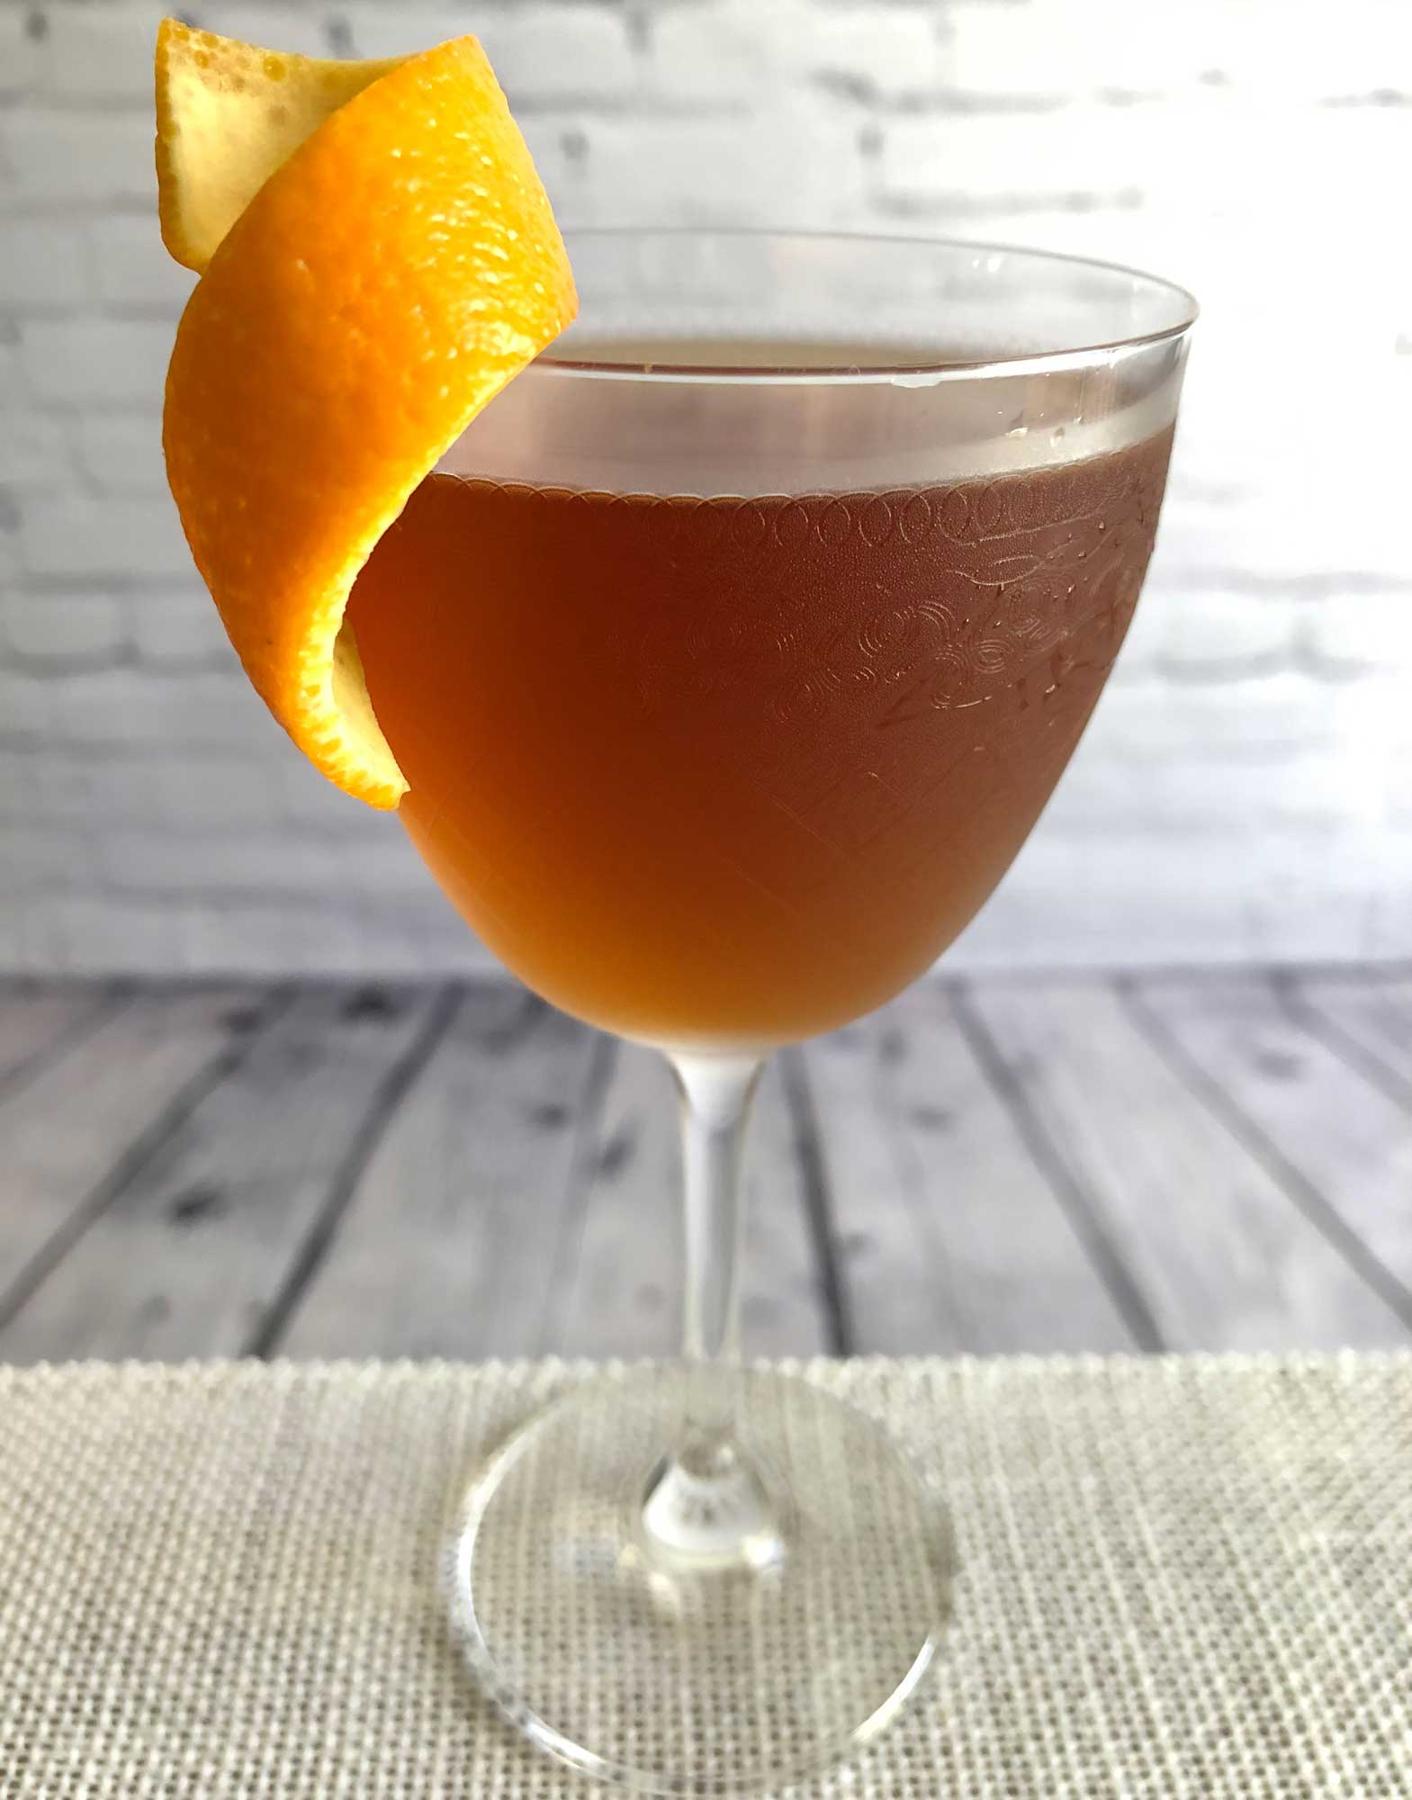 An example of the Palmetto No. 1, the mixed drink (drink) featuring Smith & Cross Traditional Jamaica Rum, Cocchi Vermouth di Torino ‘Storico’, orange bitters, and orange twist; photo by Lee Edwards